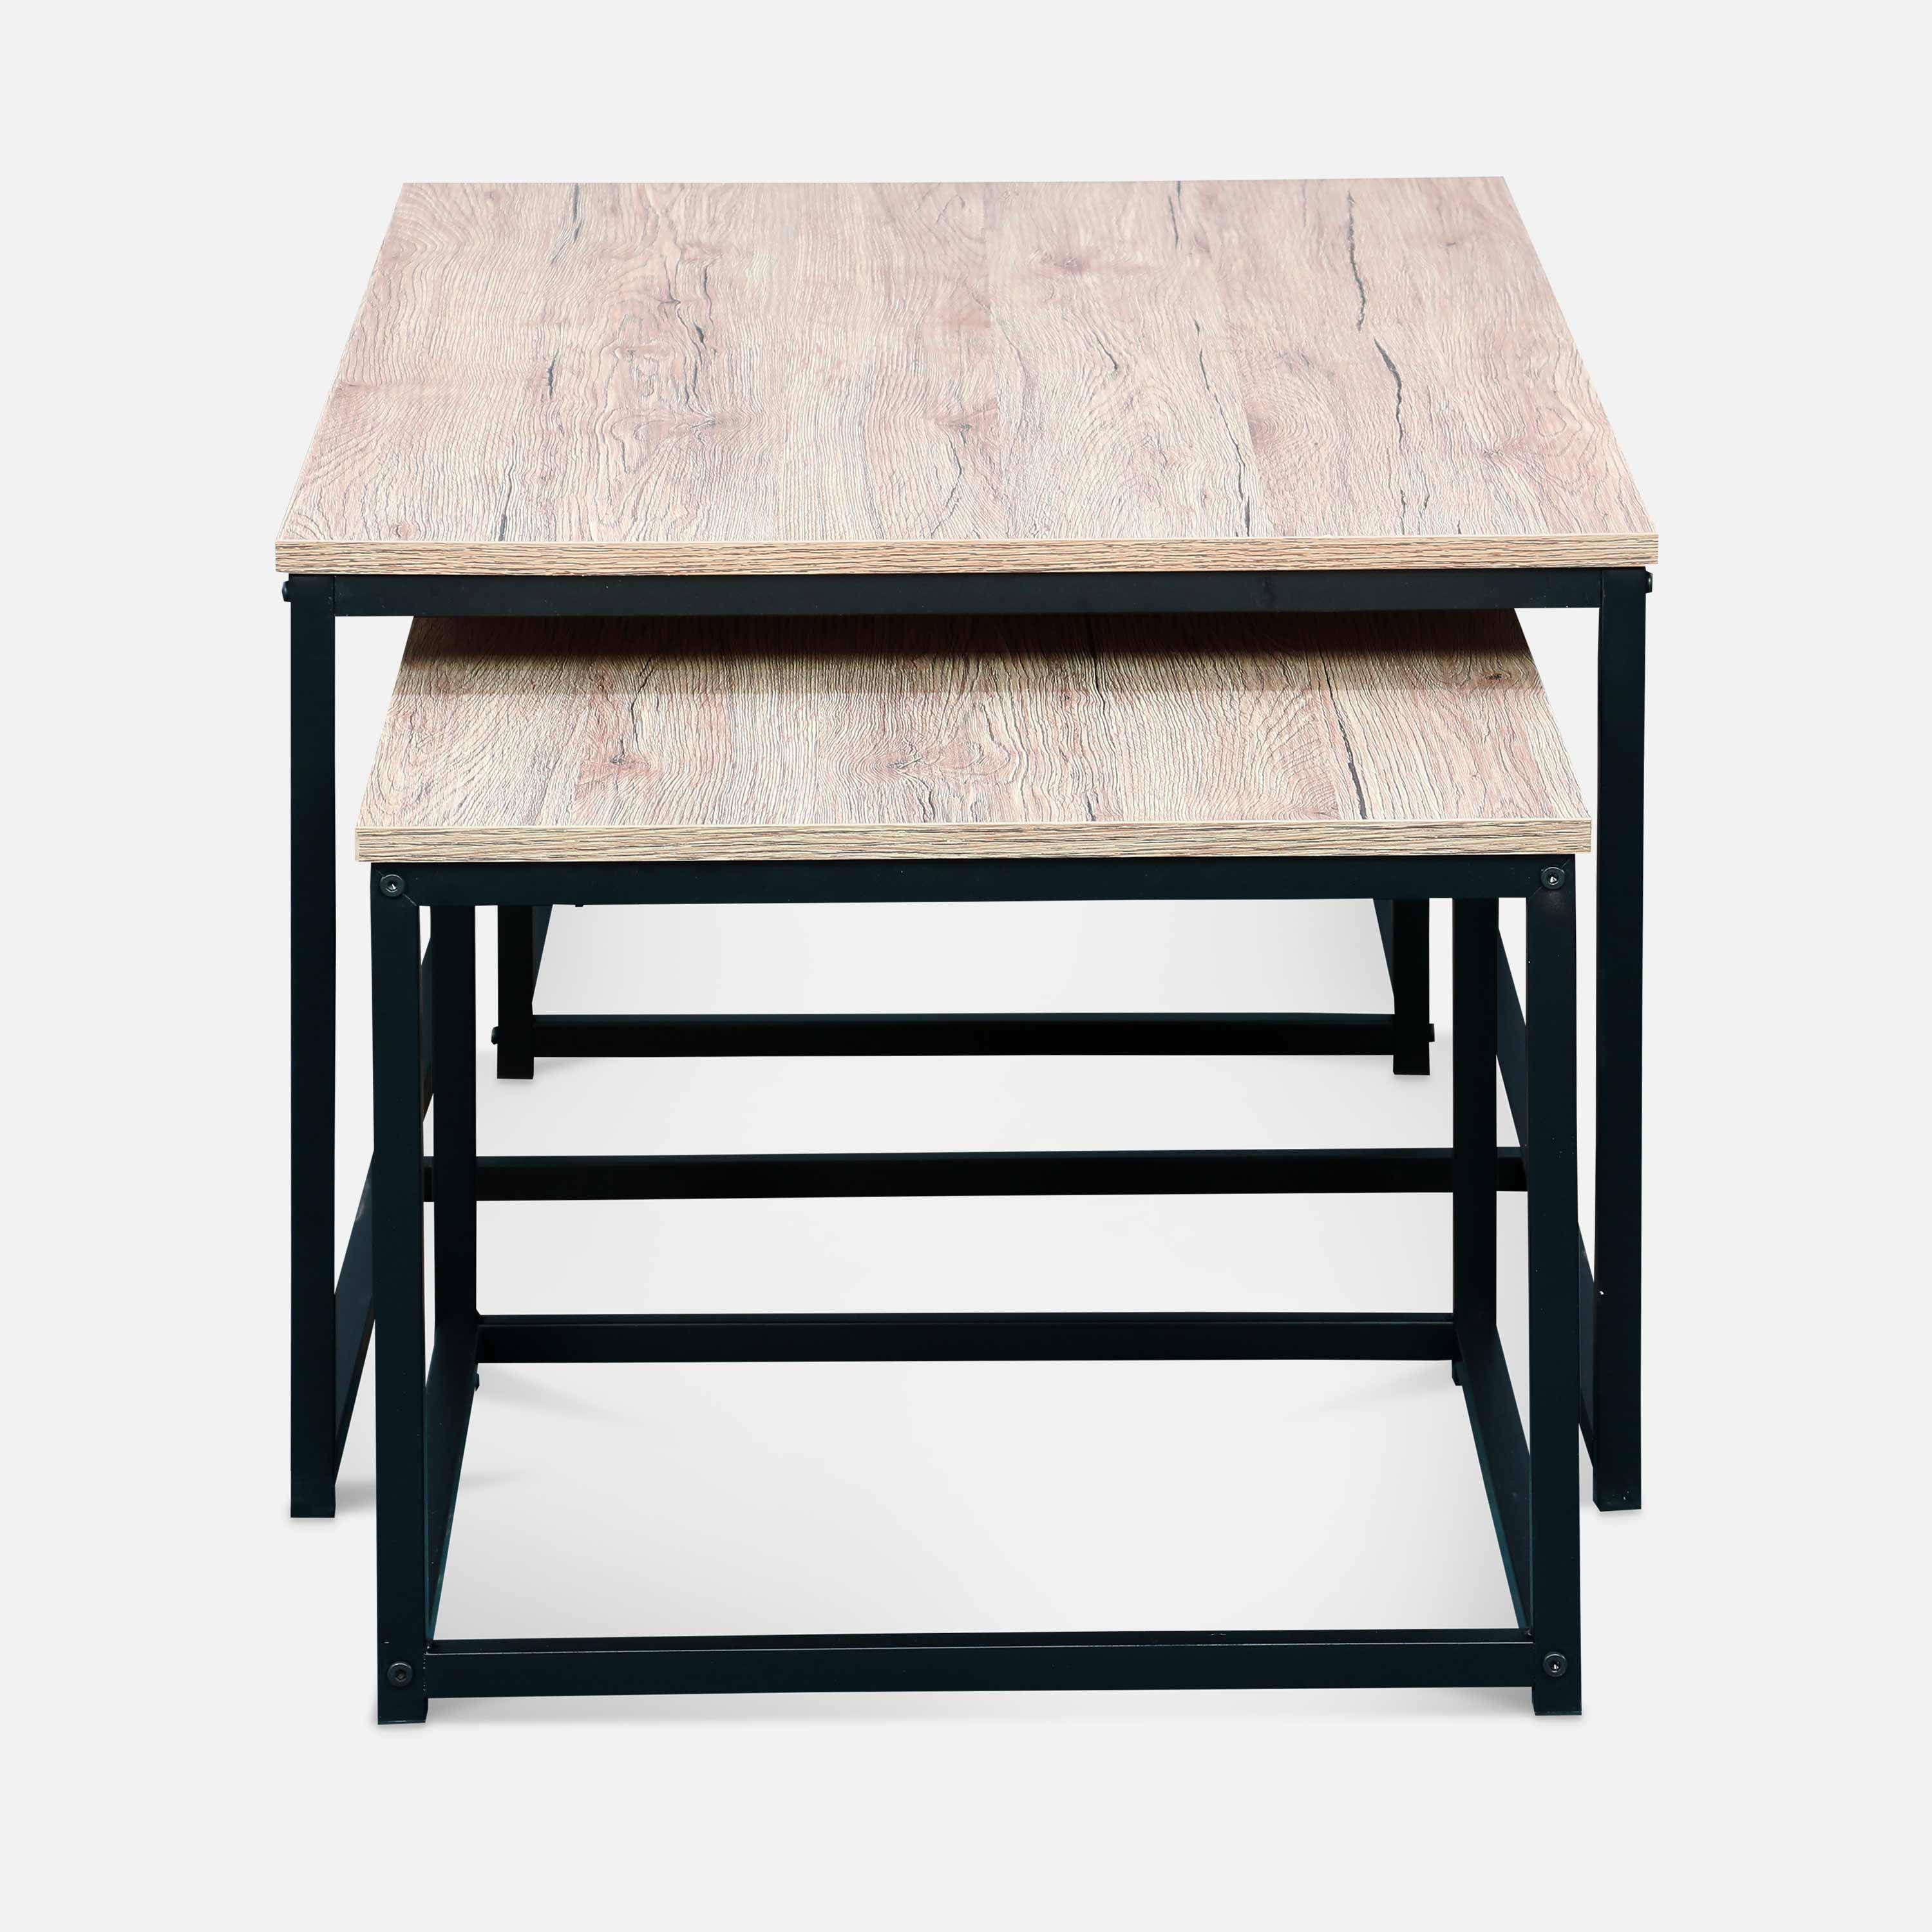 Set of 3 metal and wood-effect nesting tables, large table 100x60x45cm, 2x small tables 50x50x38cm - Loft - Black Photo5